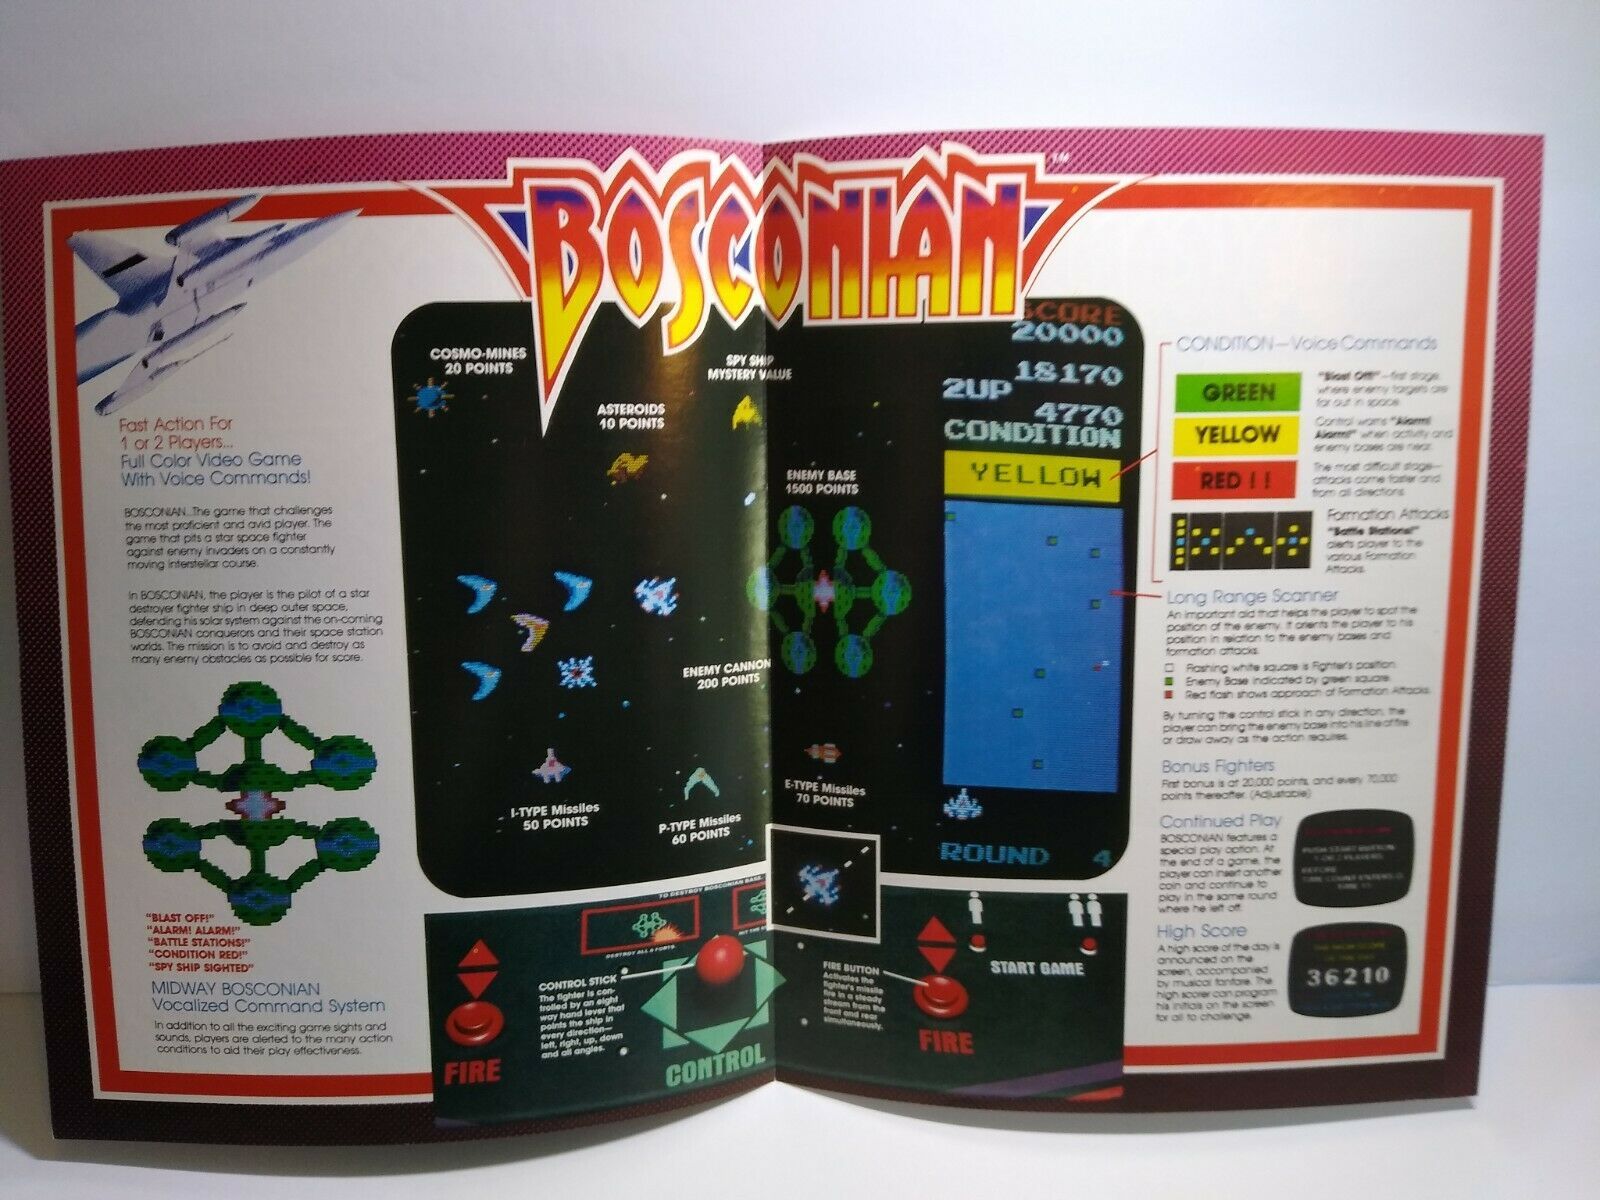 bosconian arcade game for sale